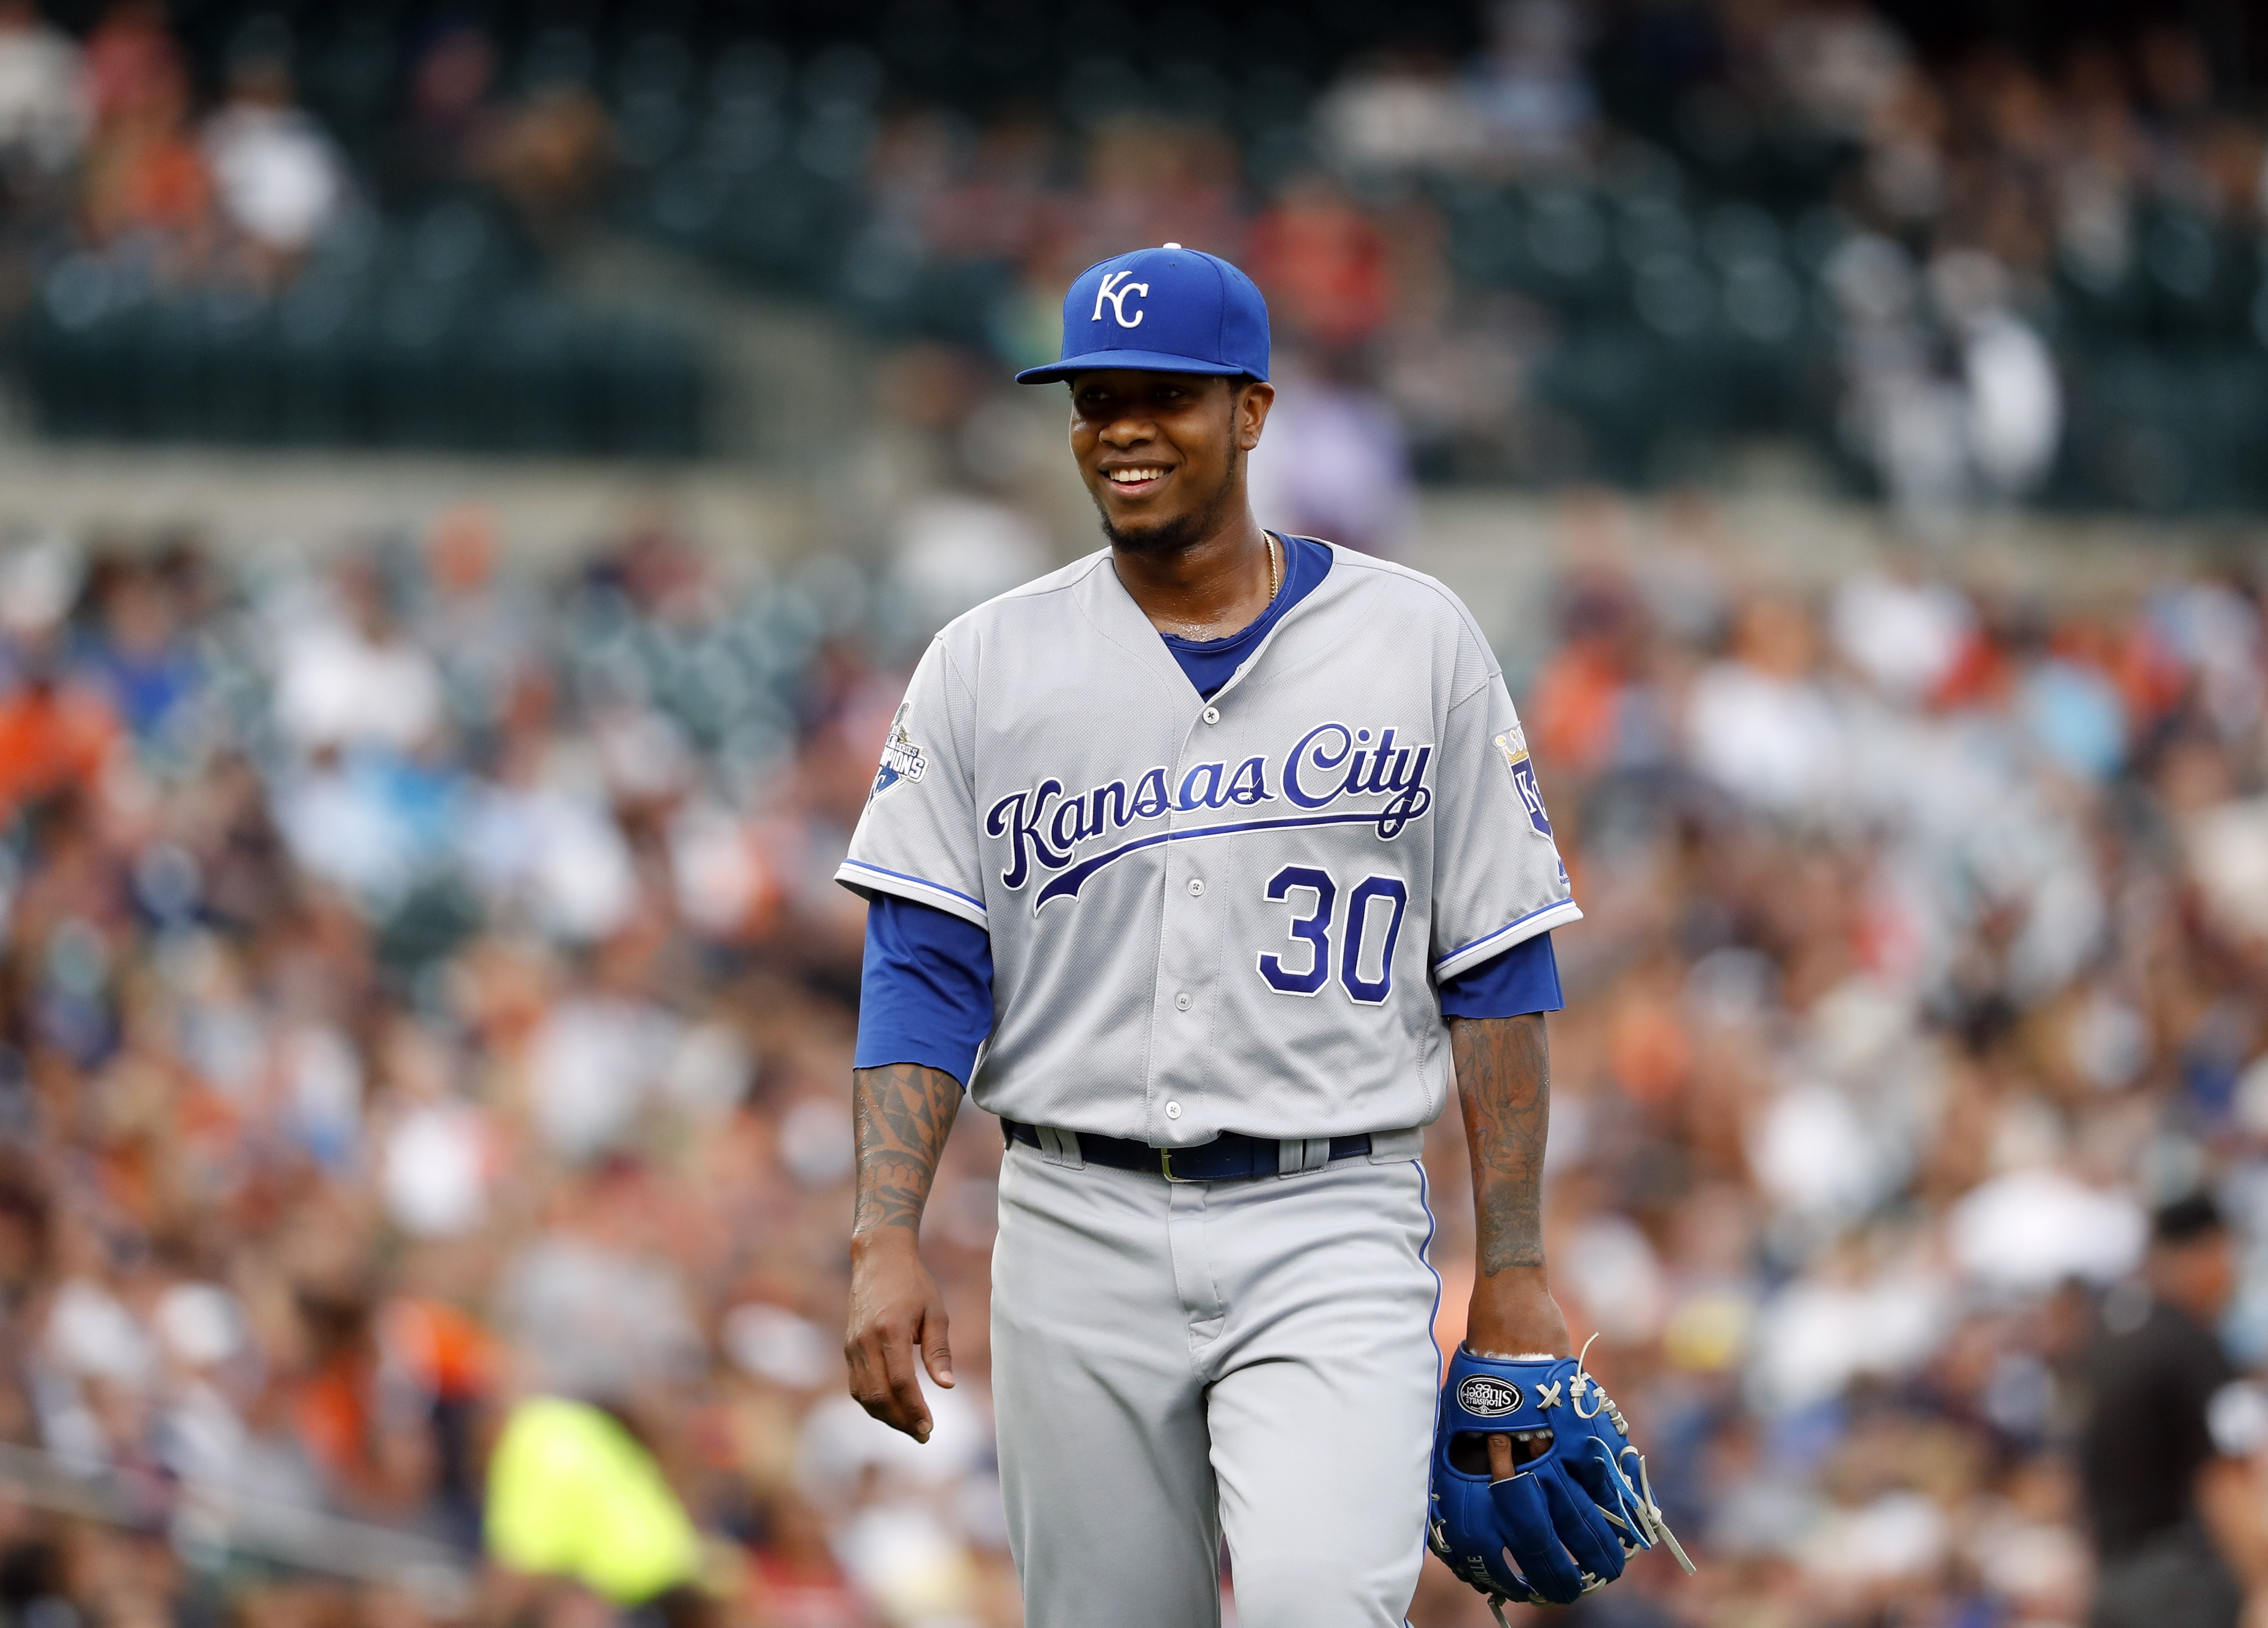 Royals Pitcher Yordano Ventura Was Killed in a Car Accident